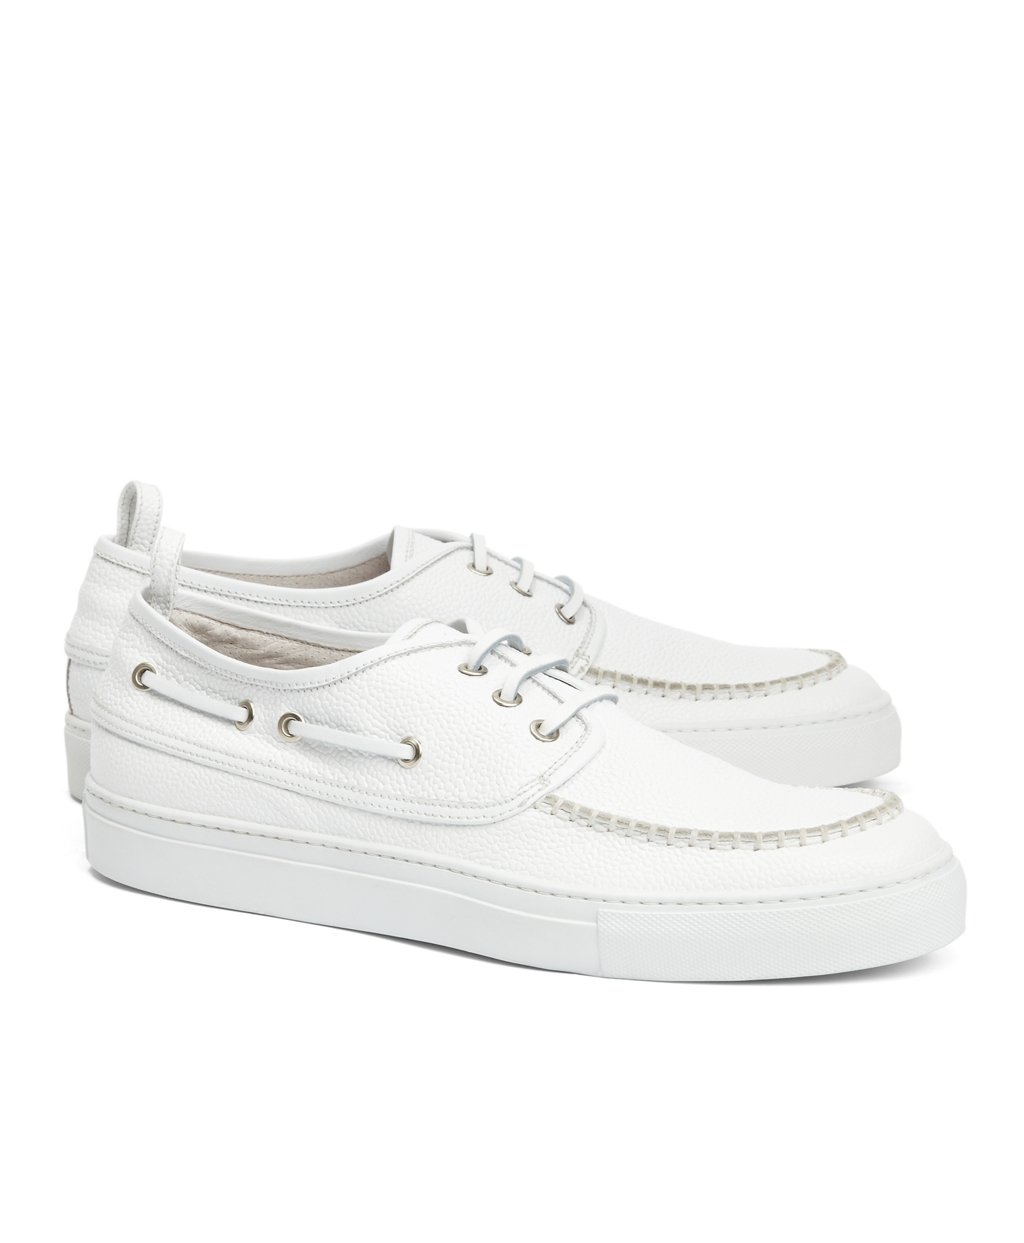 Brooks Brothers Leather White Boat Shoes for Men - Lyst